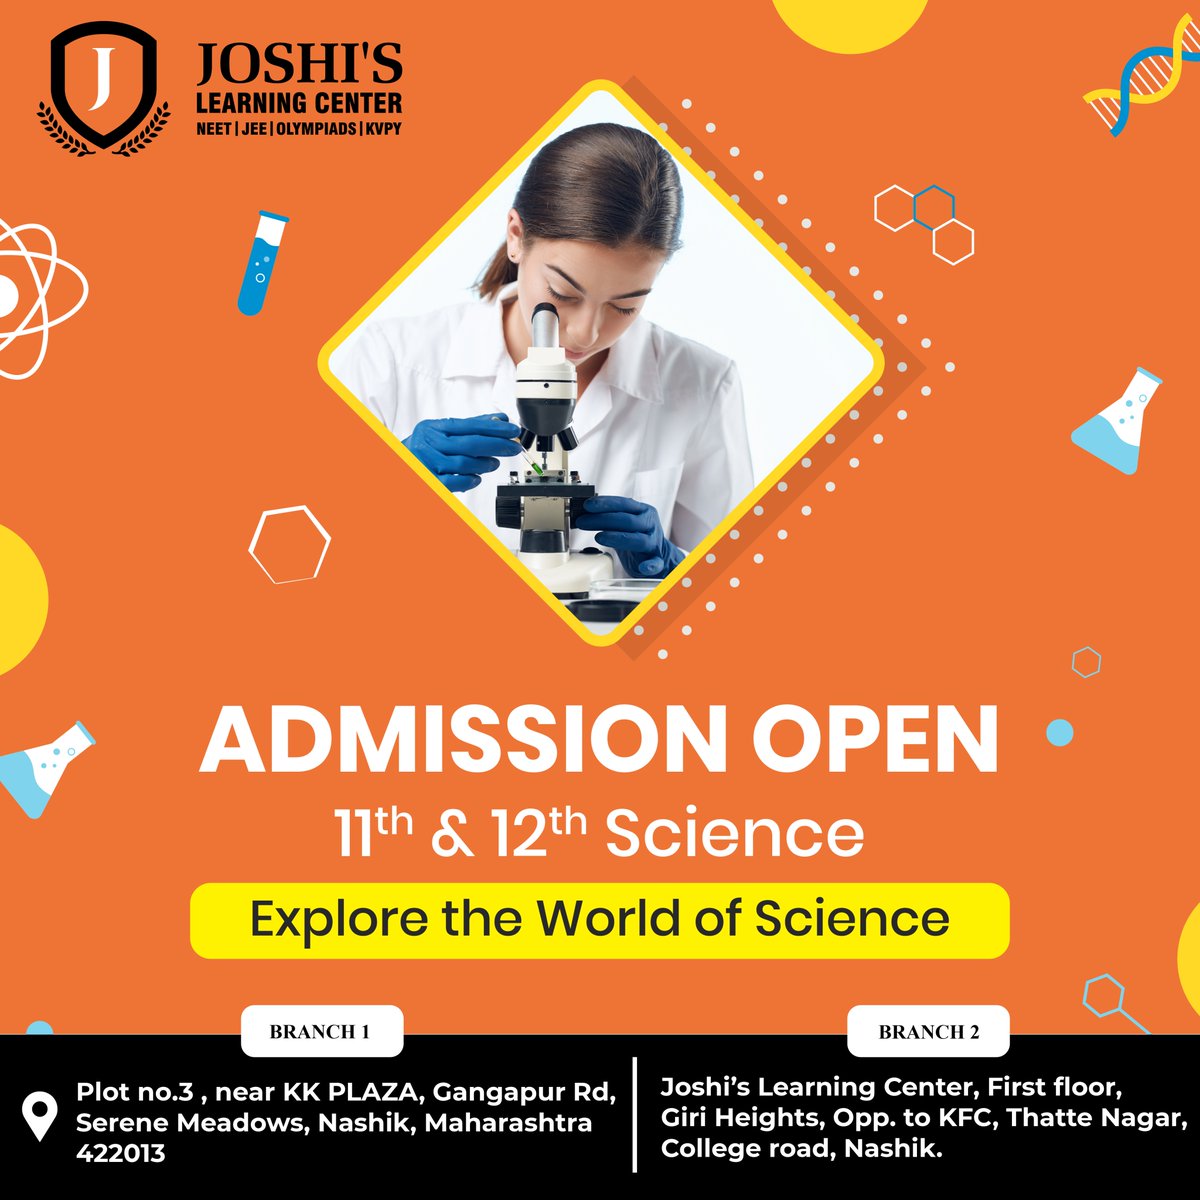 Do you dream of groundbreaking discoveries? At Joshi's Learning Centre, we nurture curiosity and cultivate the next generation of scientific leaders. Apply Today!

#science #sciencefacts  #jee  #exam #examsuccess #exampreparation #11th #12th  #nashik #nashikcity #nashikgram